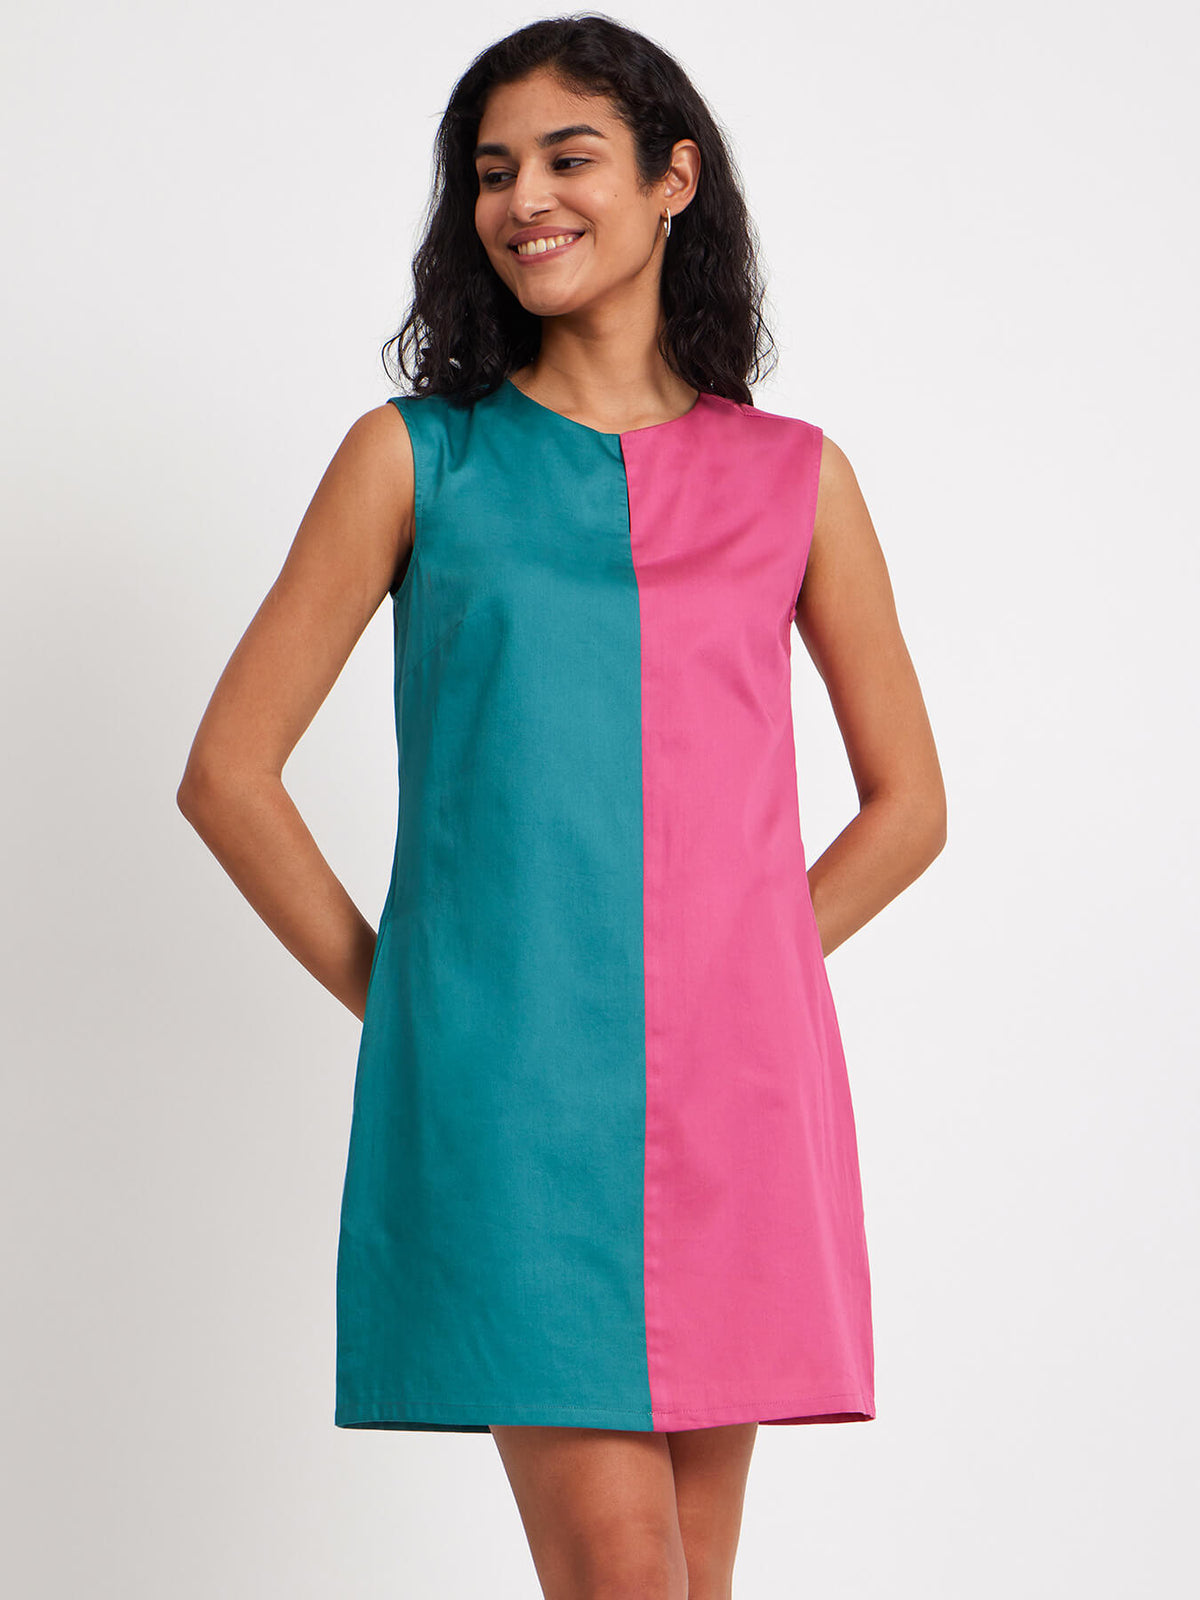 Colour Block Sleeveless Dress - Pink And Teal